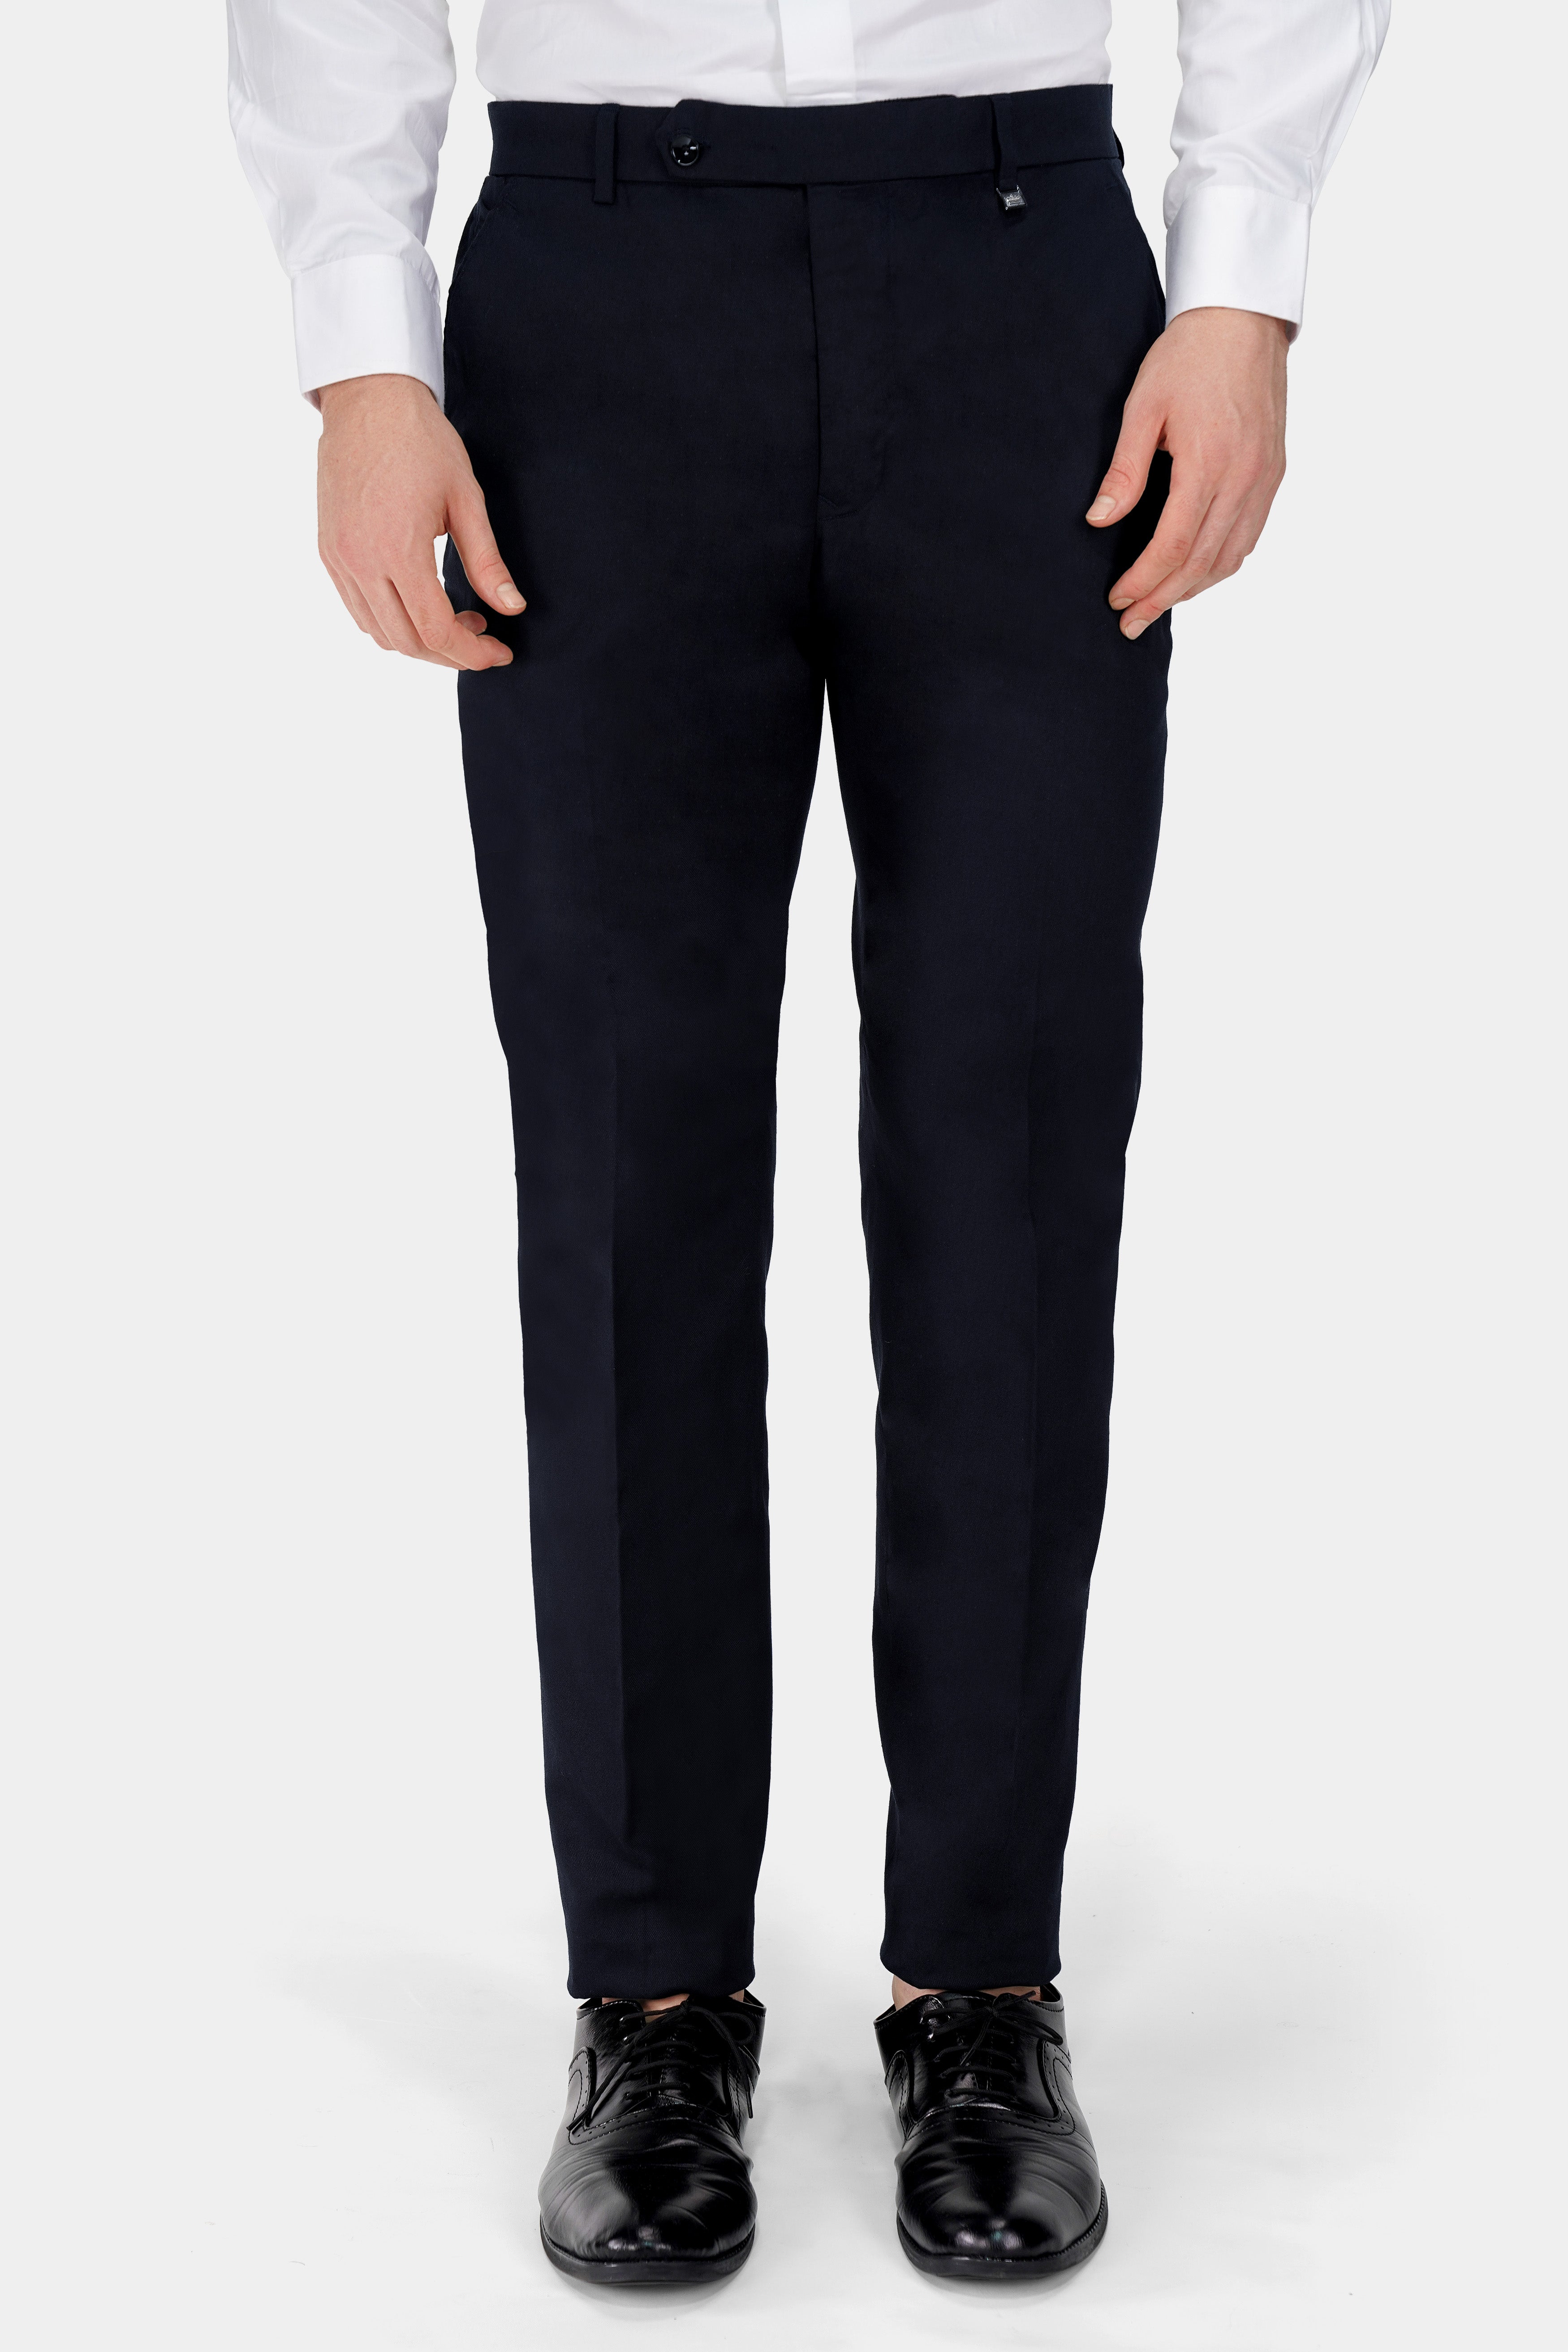 Buy Navy blue Solid Straight-Fit Cotton Pant Online in India -Beyoung